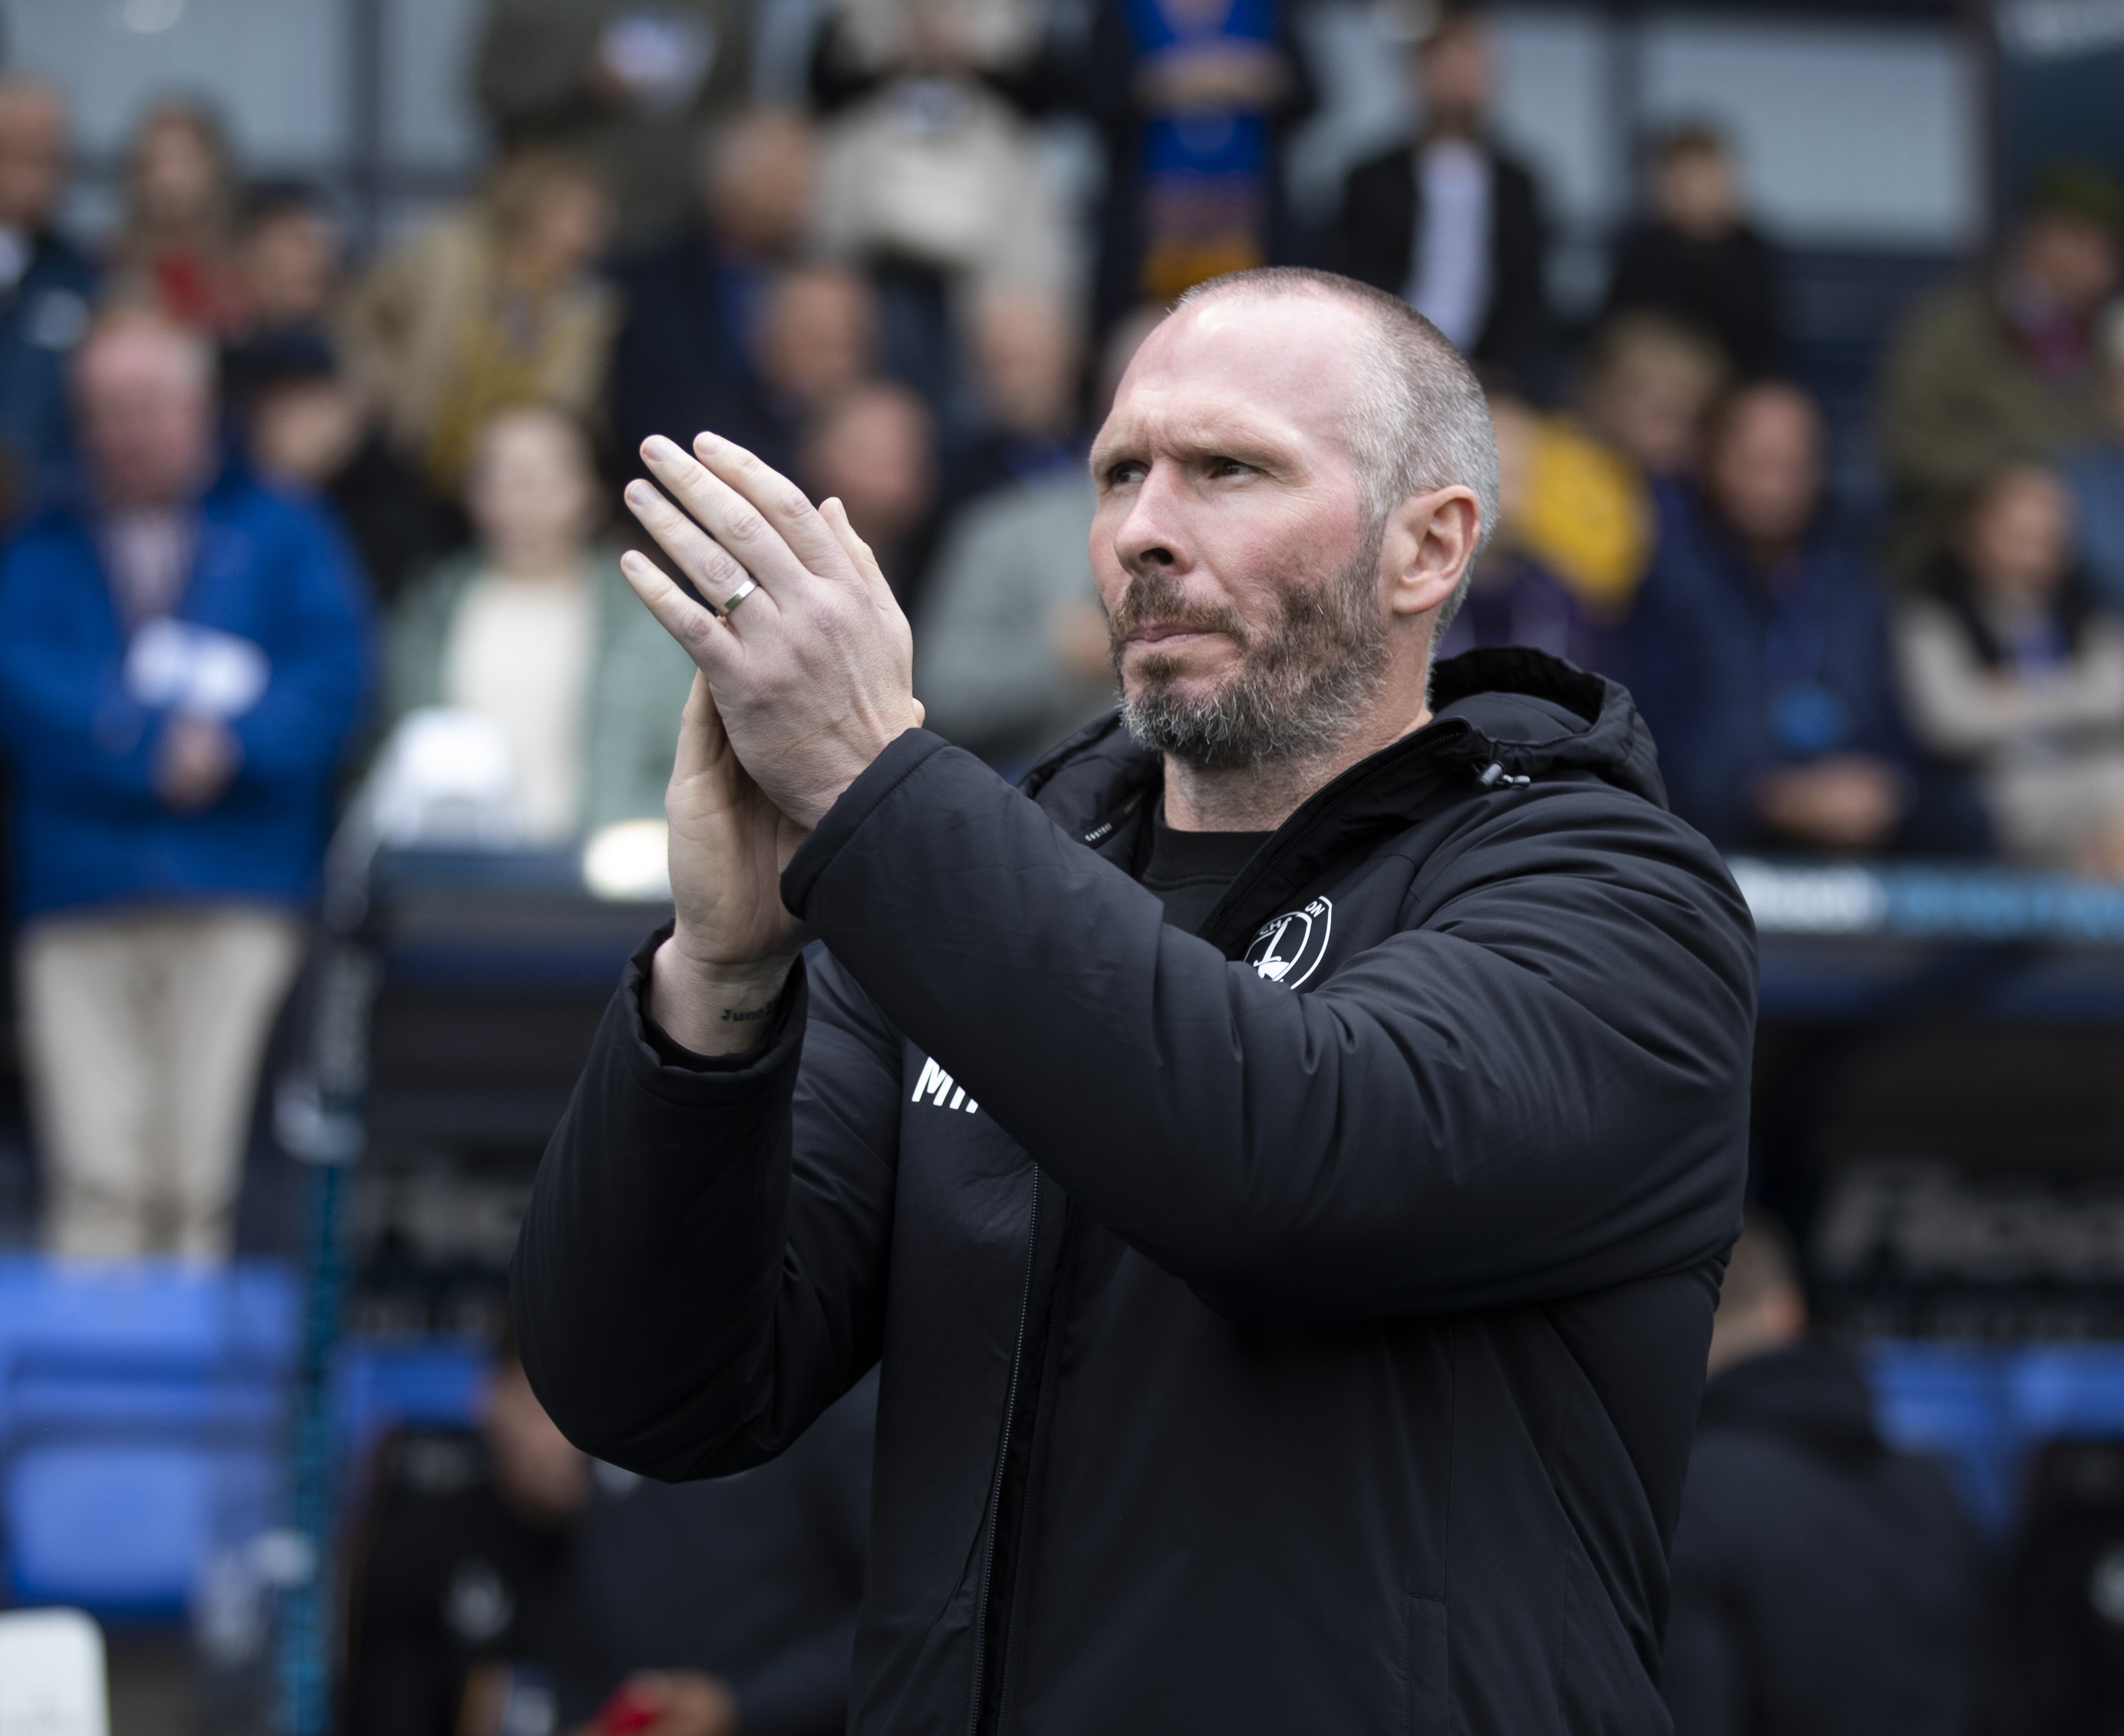 Michael Appleton claps supporters 